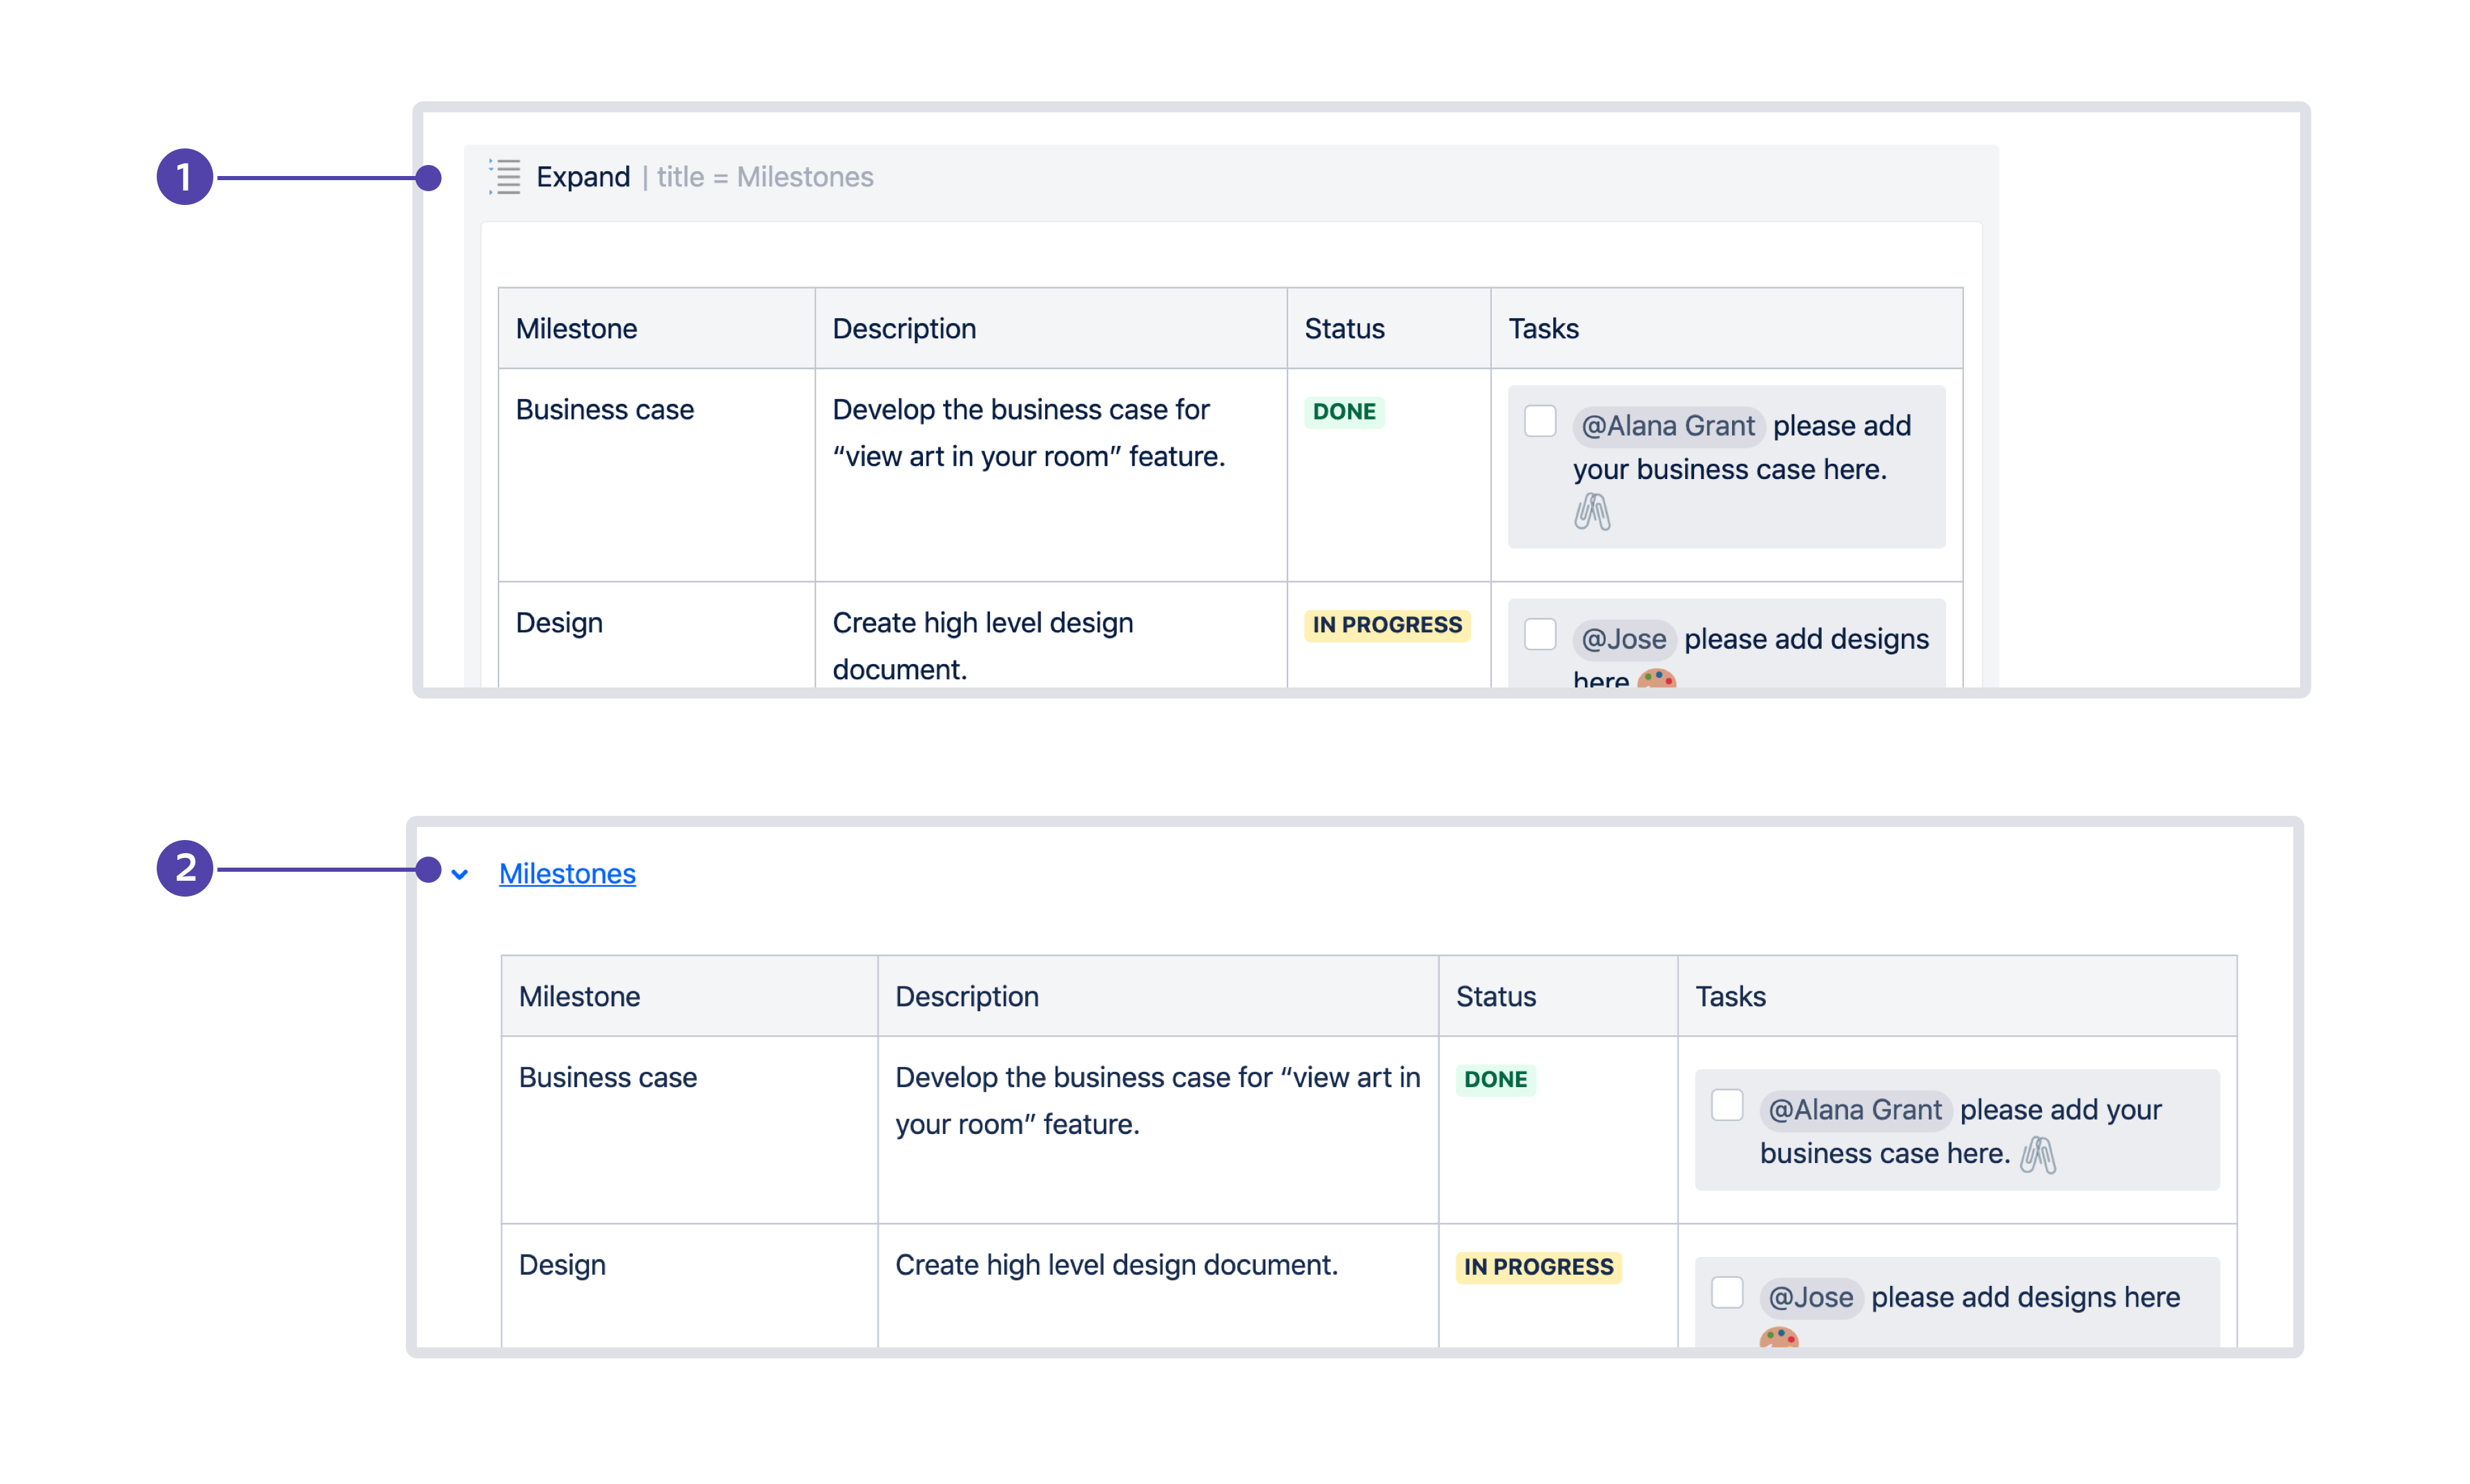 how to use confluence to create a date